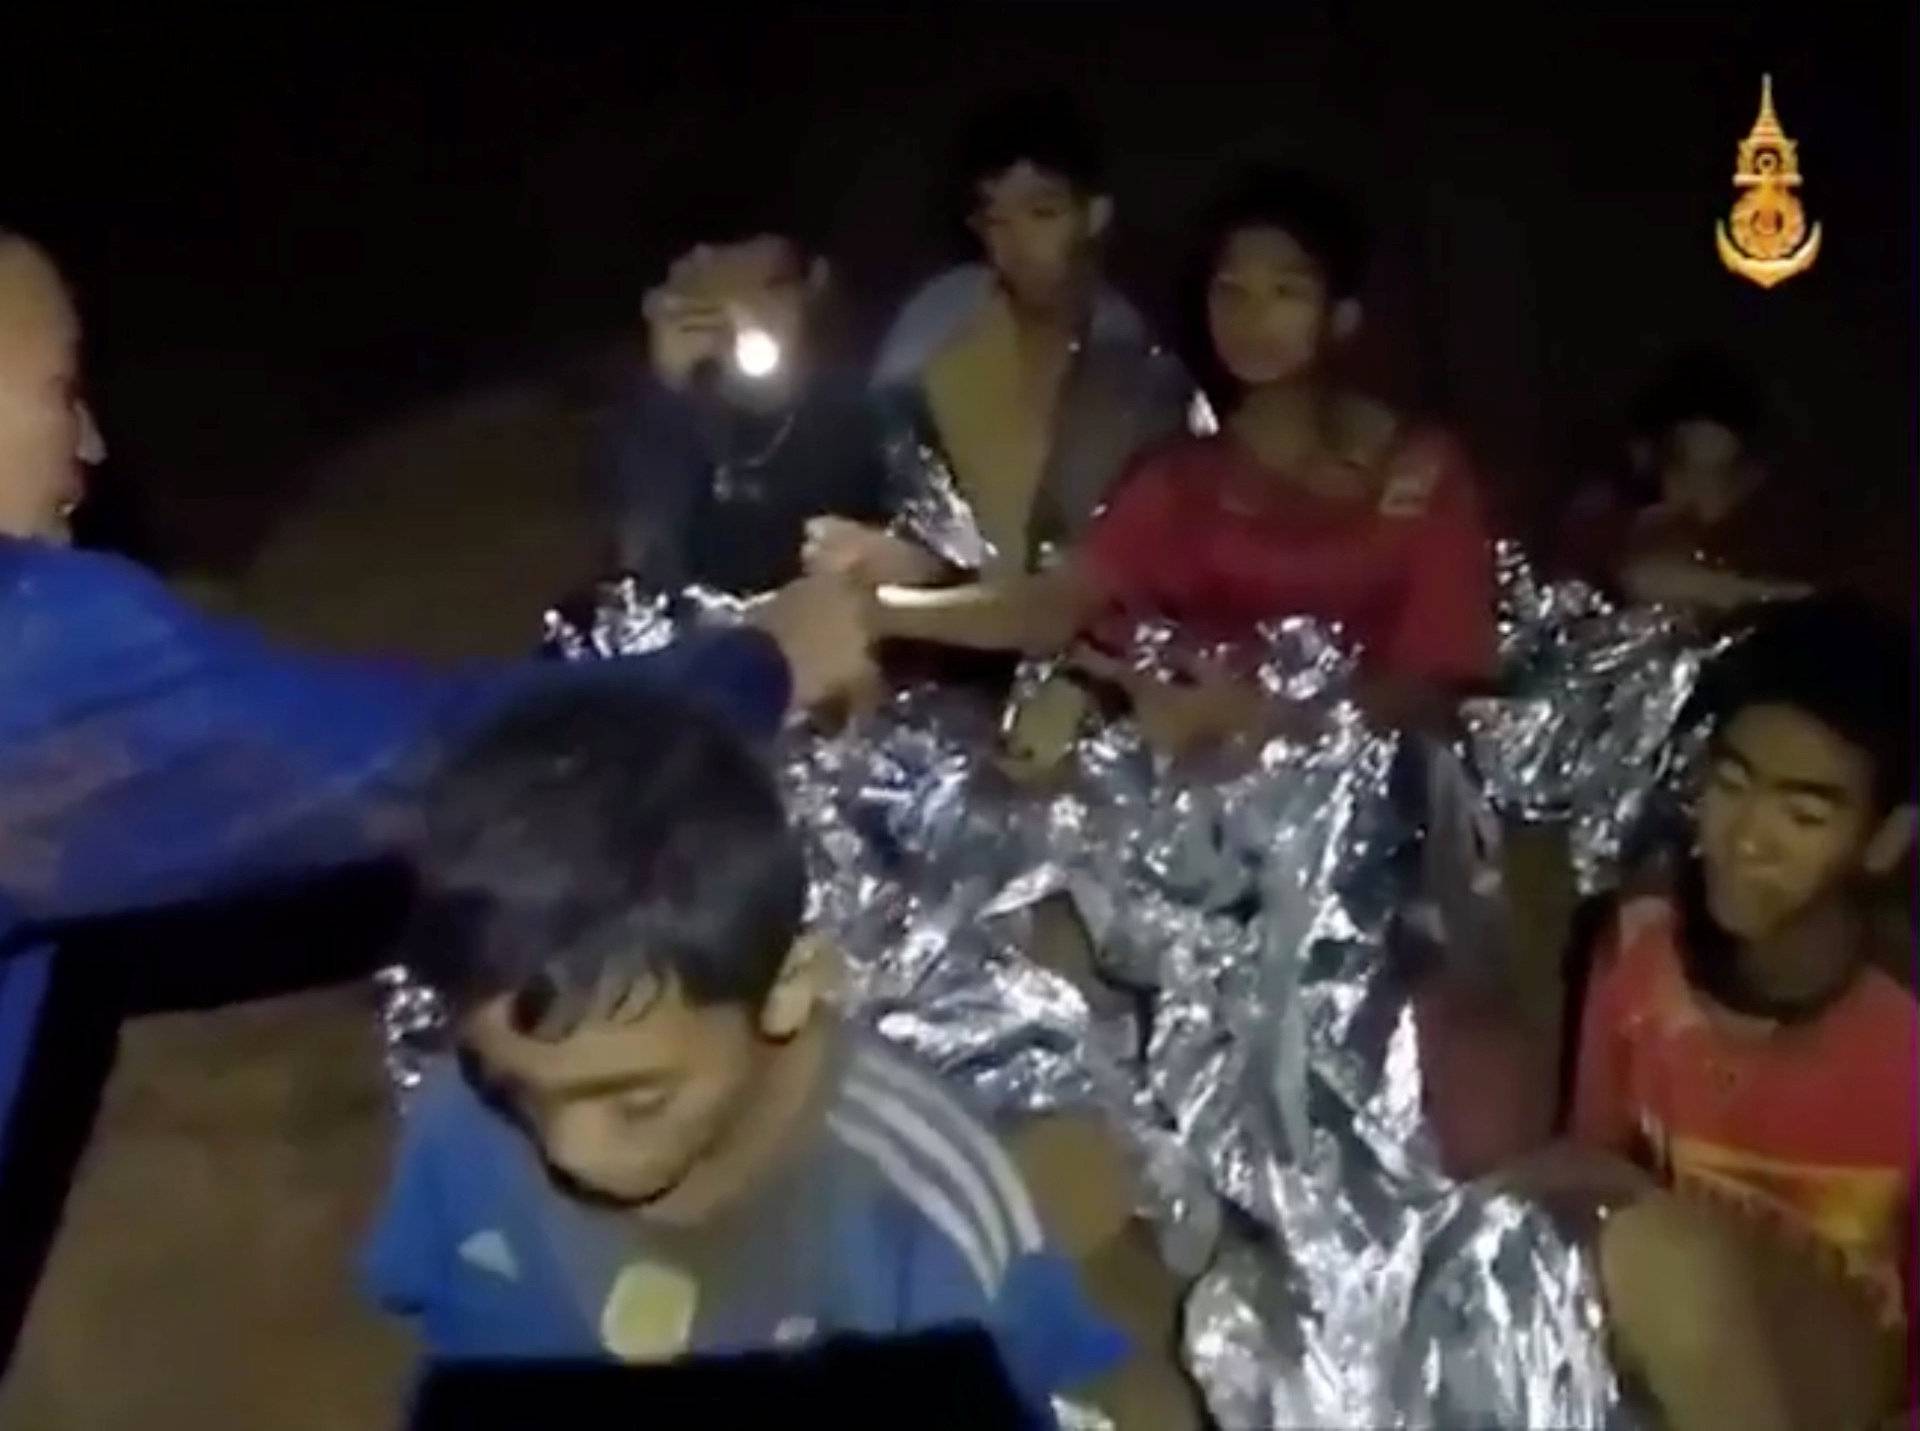 Boys from the under-16 soccer team trapped inside Tham Luang cave receive treatment from a medic in Chiang Rai, Thailand